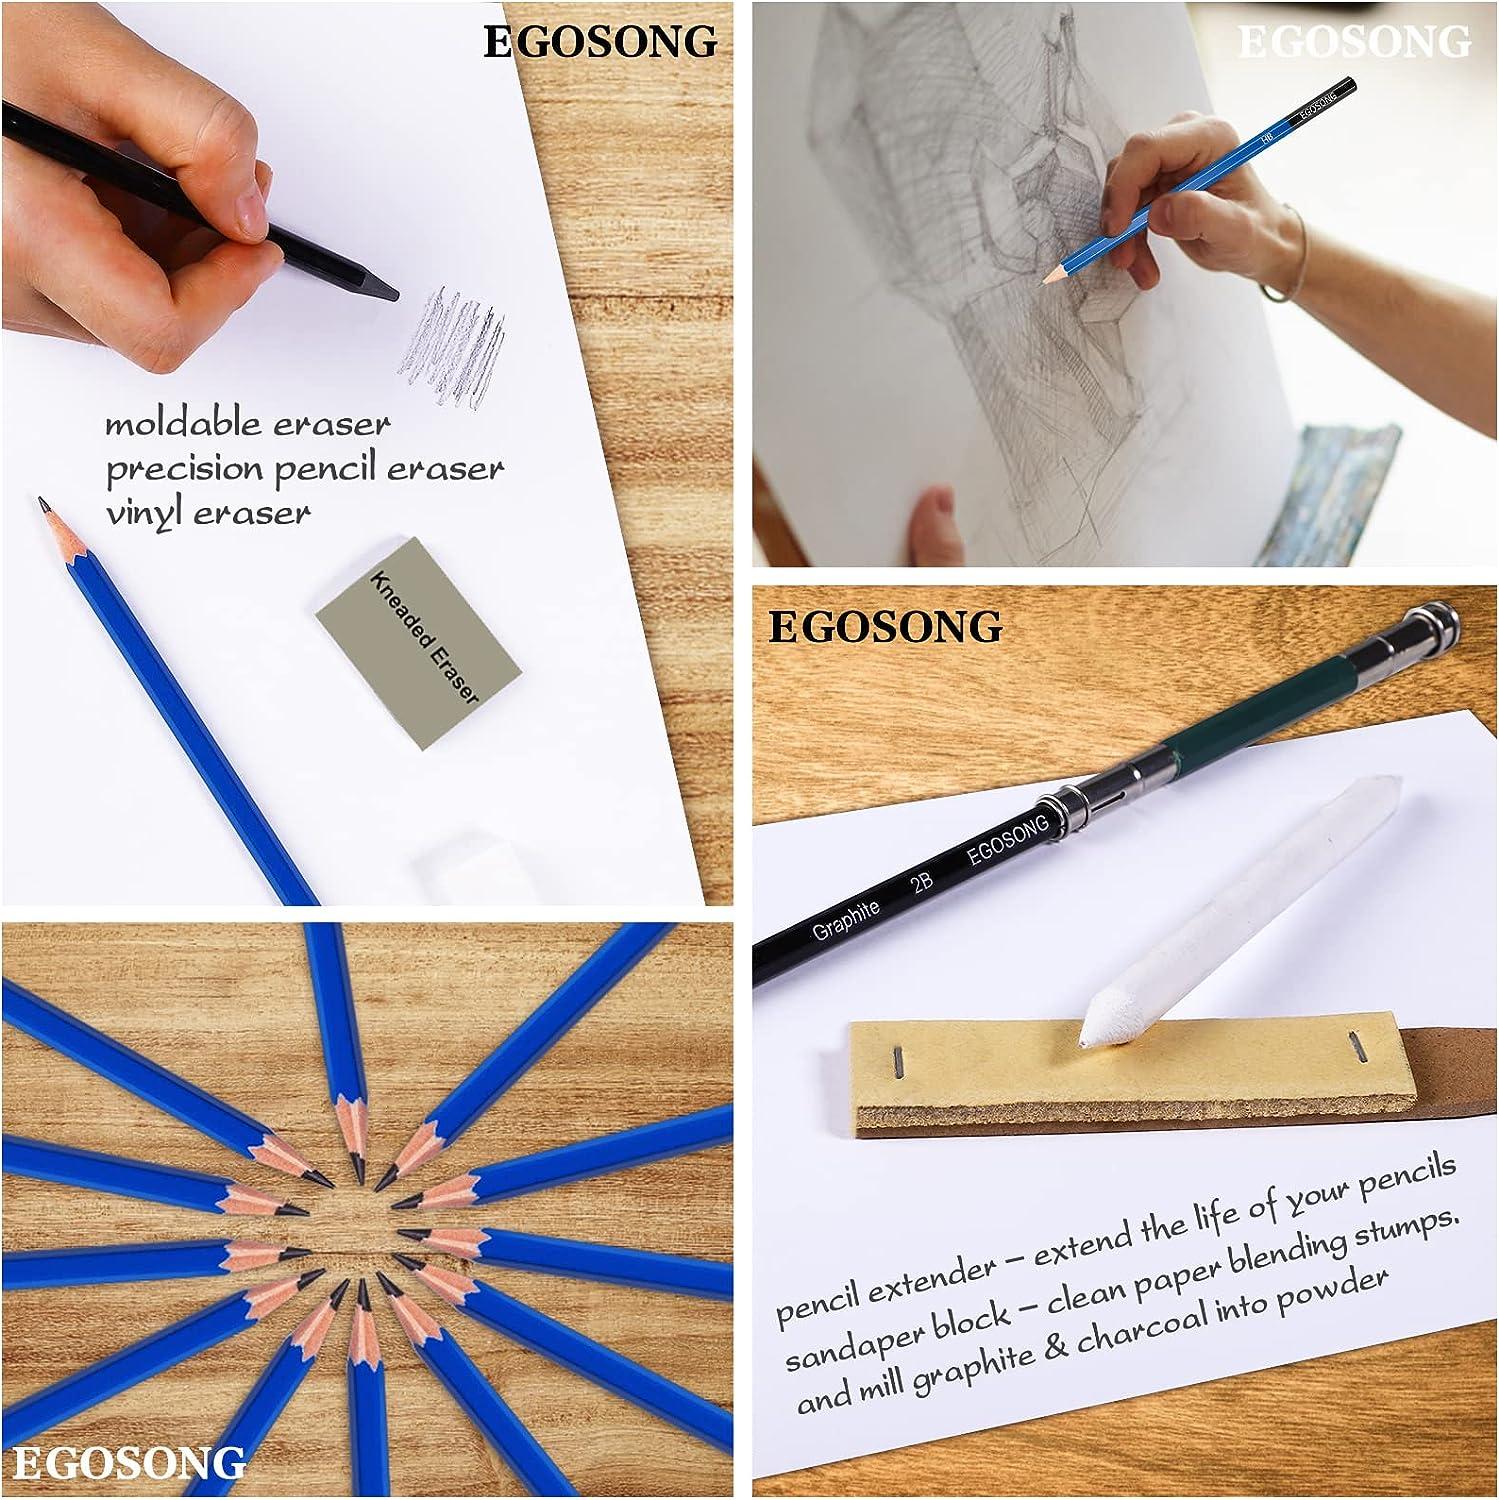 How to Make a Personalized Sketch Kit.